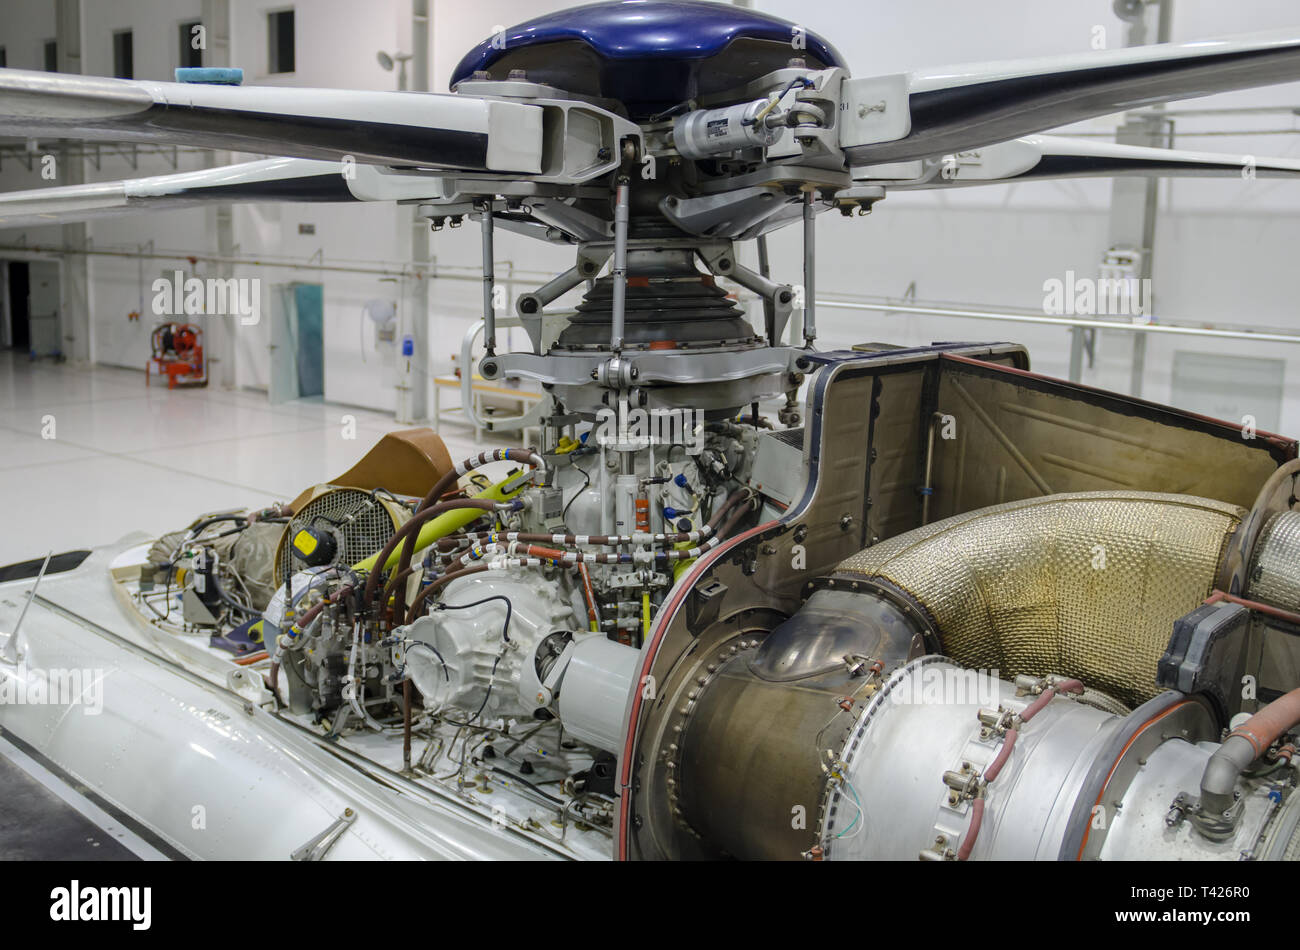 Helicopter gas-turbine engine with the cowling opened for maintenance in hangar Stock Photo